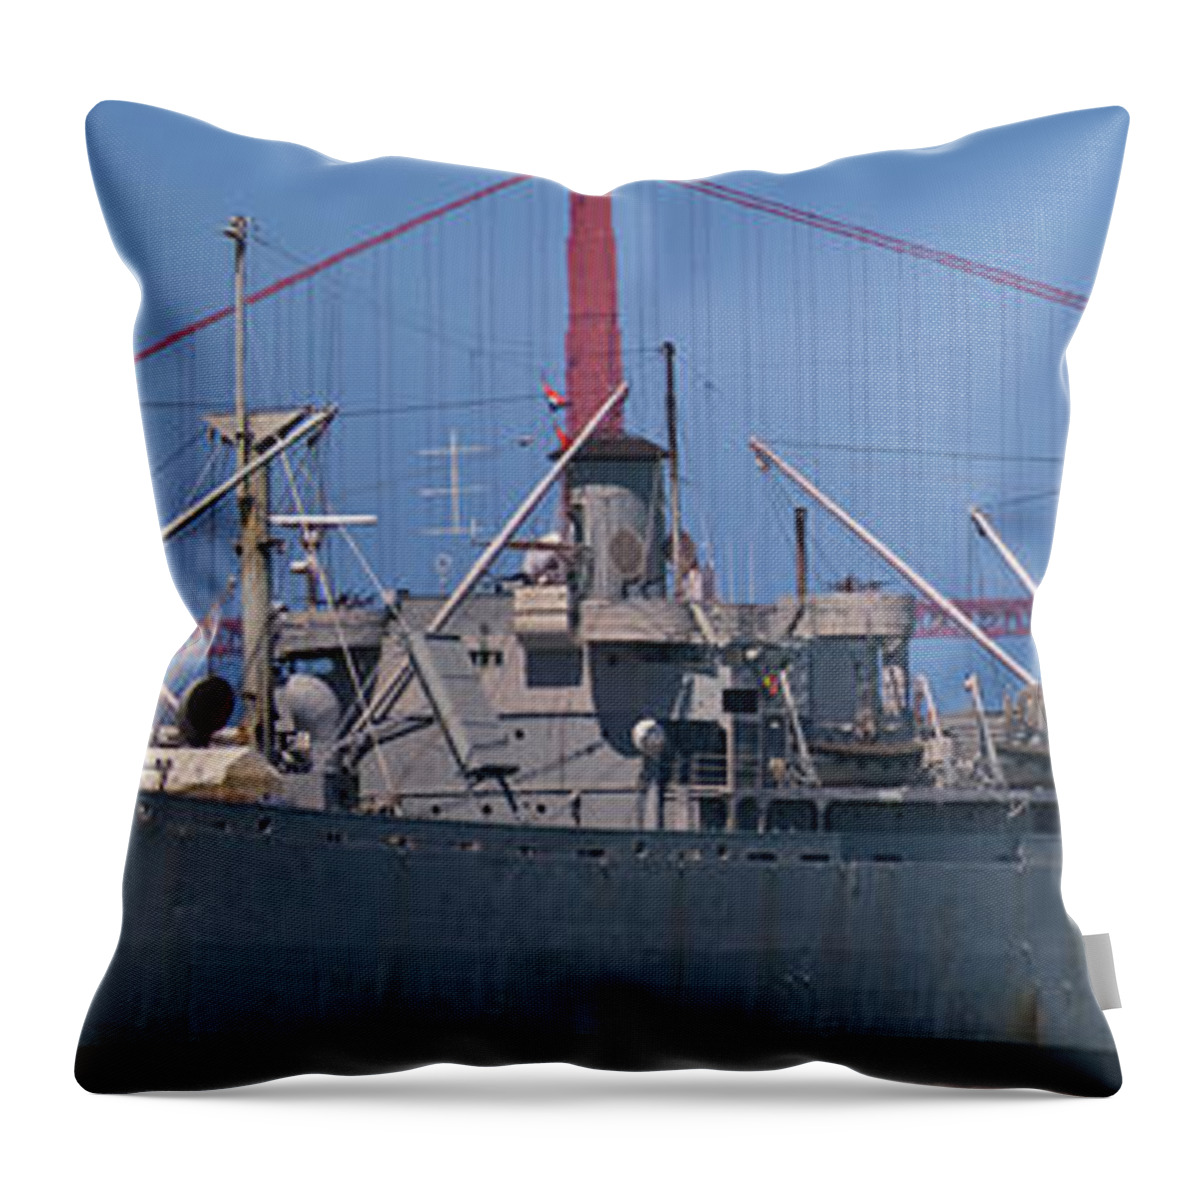 Golden Gate Throw Pillow featuring the photograph Jeremiah OBrien Liberty Ship by Tim Mulina